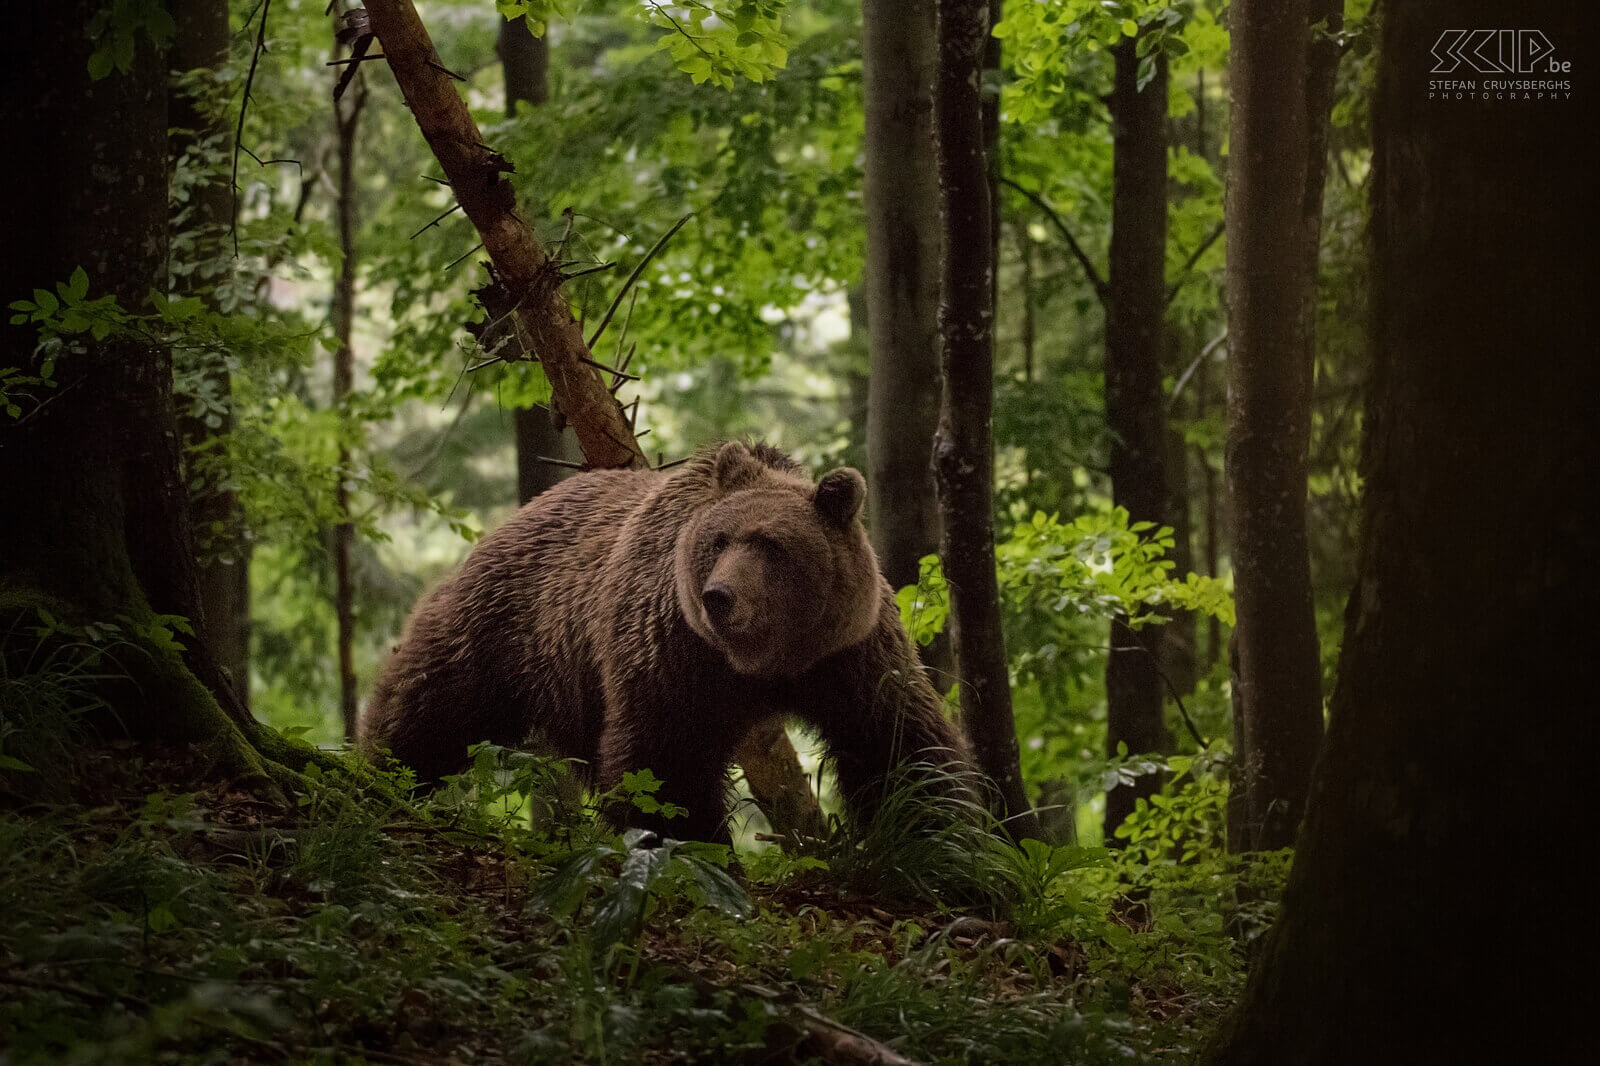 Notranjska - Brown bear It is estimated that more than 400 brown bears (Ursus arctos) live in the Notranjska region in southwestern Slovenia. Together with 3 other photographers, I installed myself in a hide deep in the forests around 4 pm and waited silently. It had been a few very hot days and soon it started to get darker followed by rain, thunder and hail. This continued for hours and we feared that the bears wouldn't come anymore. Suddenly at 8 pm a mother bear with 3 cubs came closer by to the hut. It was a fantastic sighting. However, it still rained a bit and it was already quite dark.  Stefan Cruysberghs